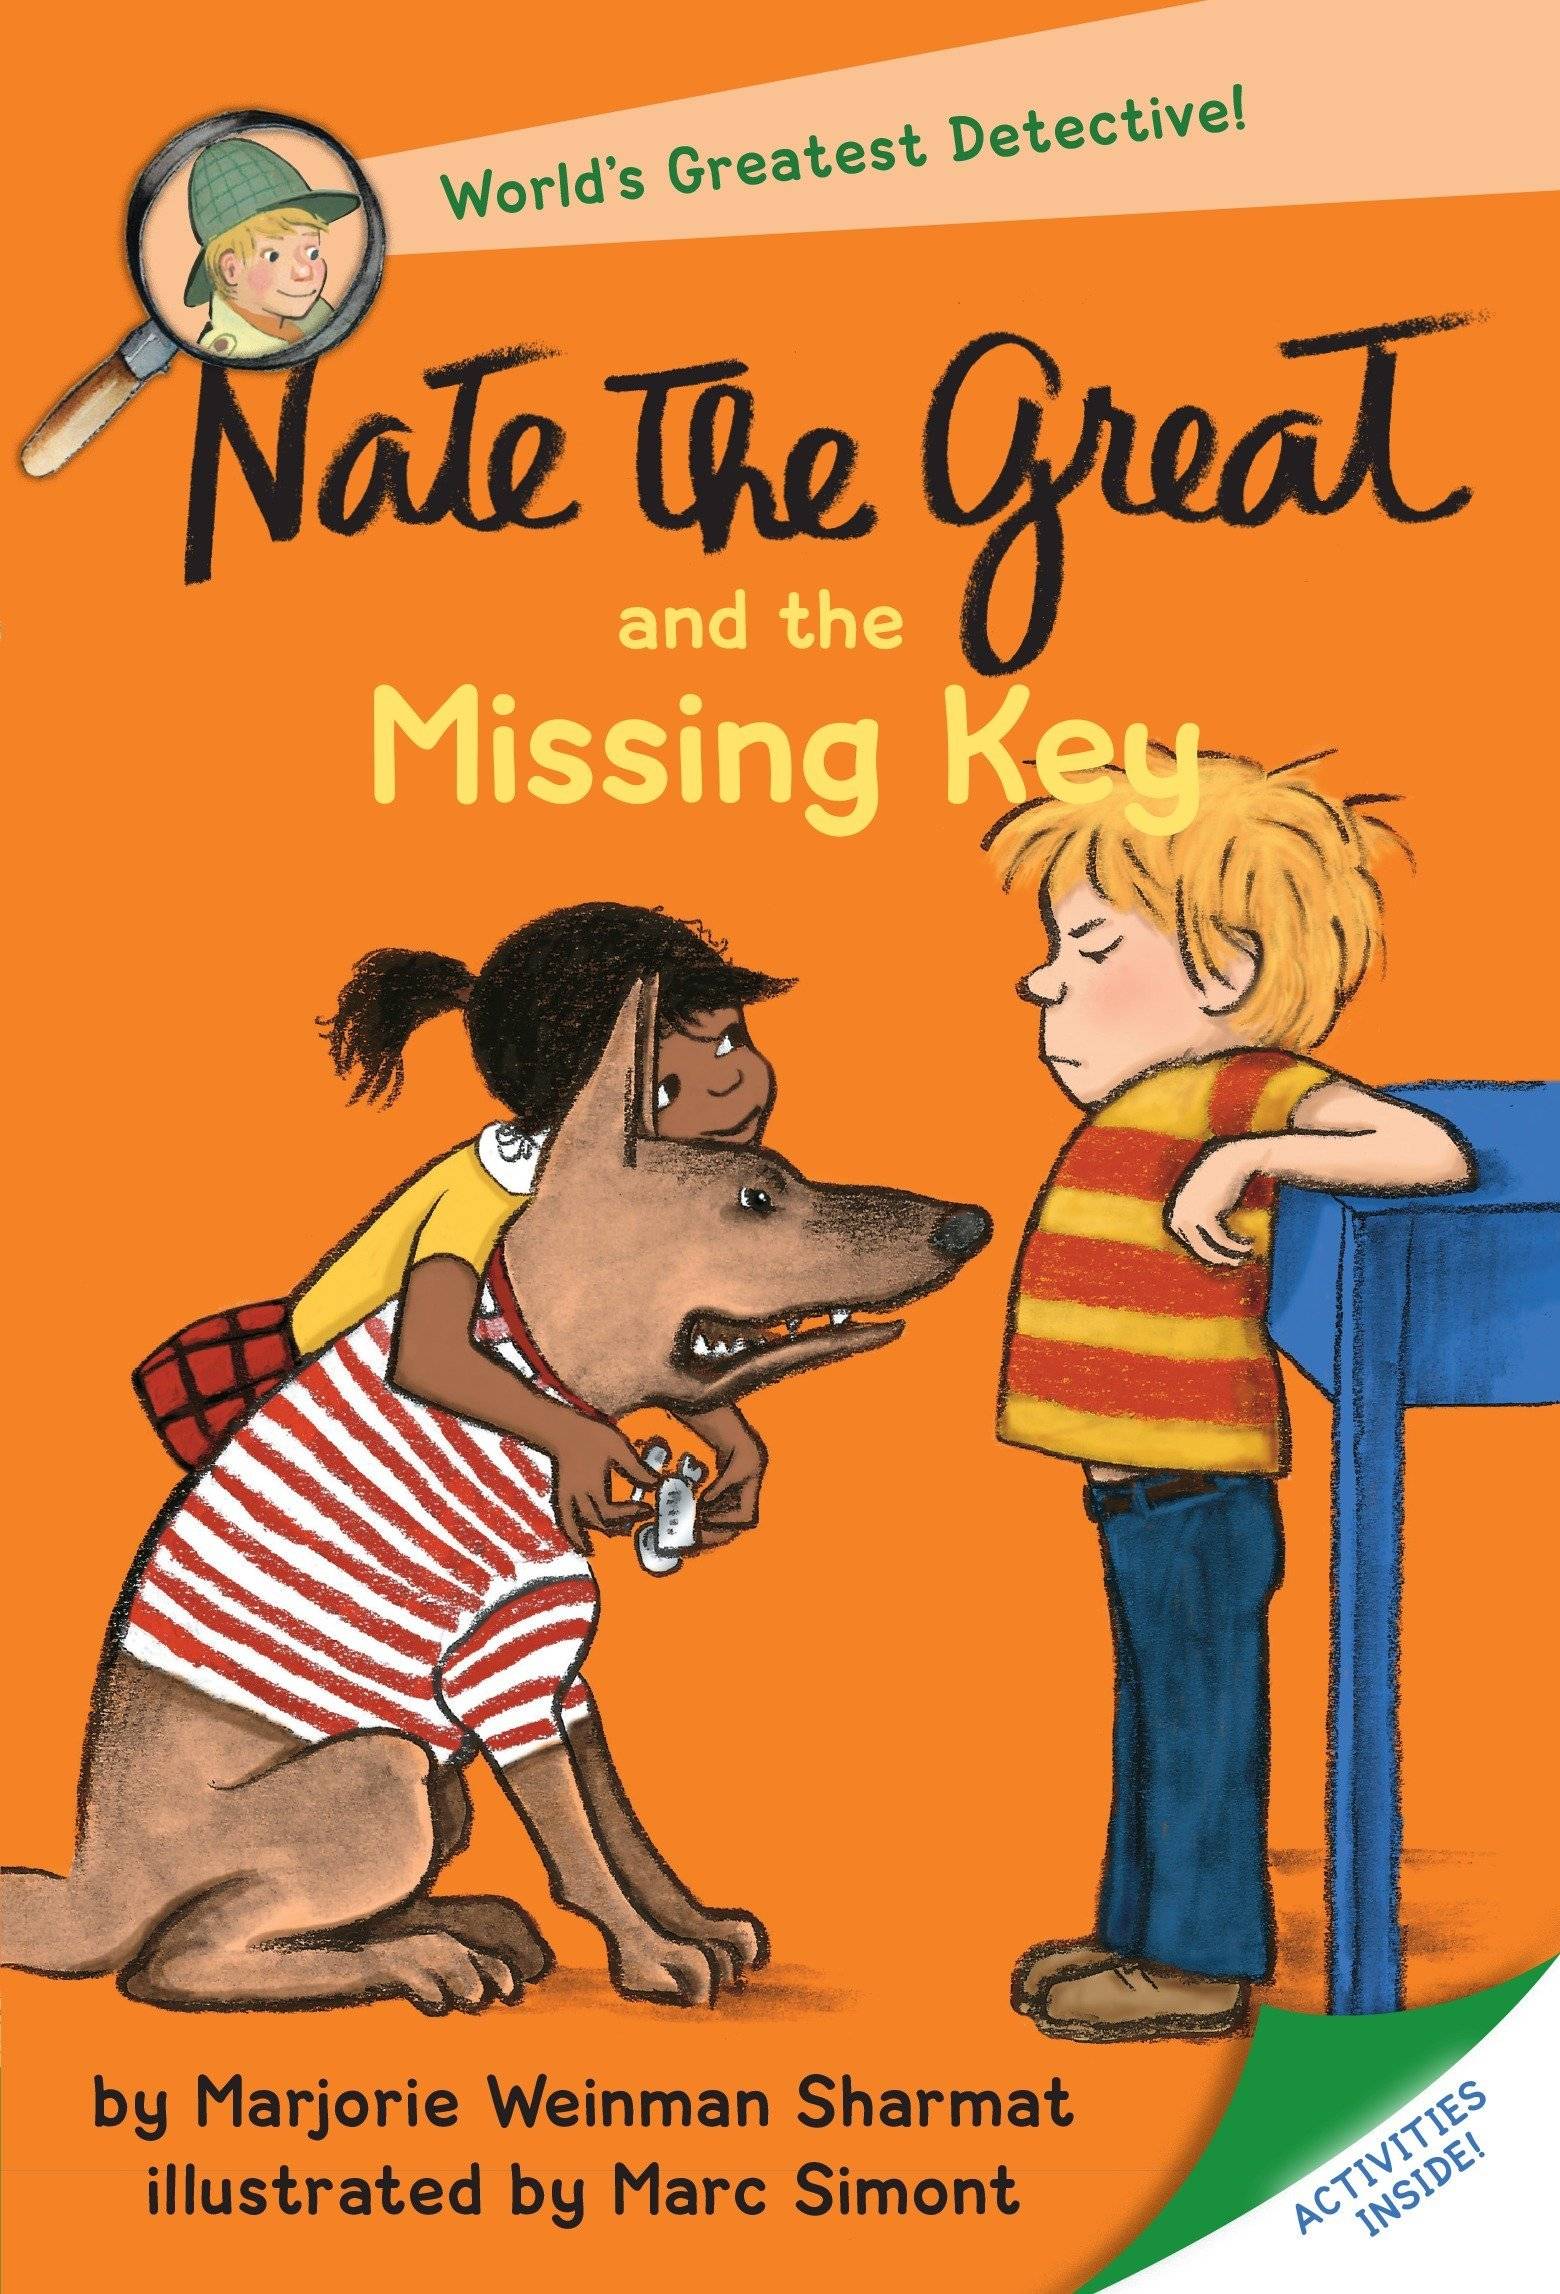 IMG : Nate the great and the Missing Key